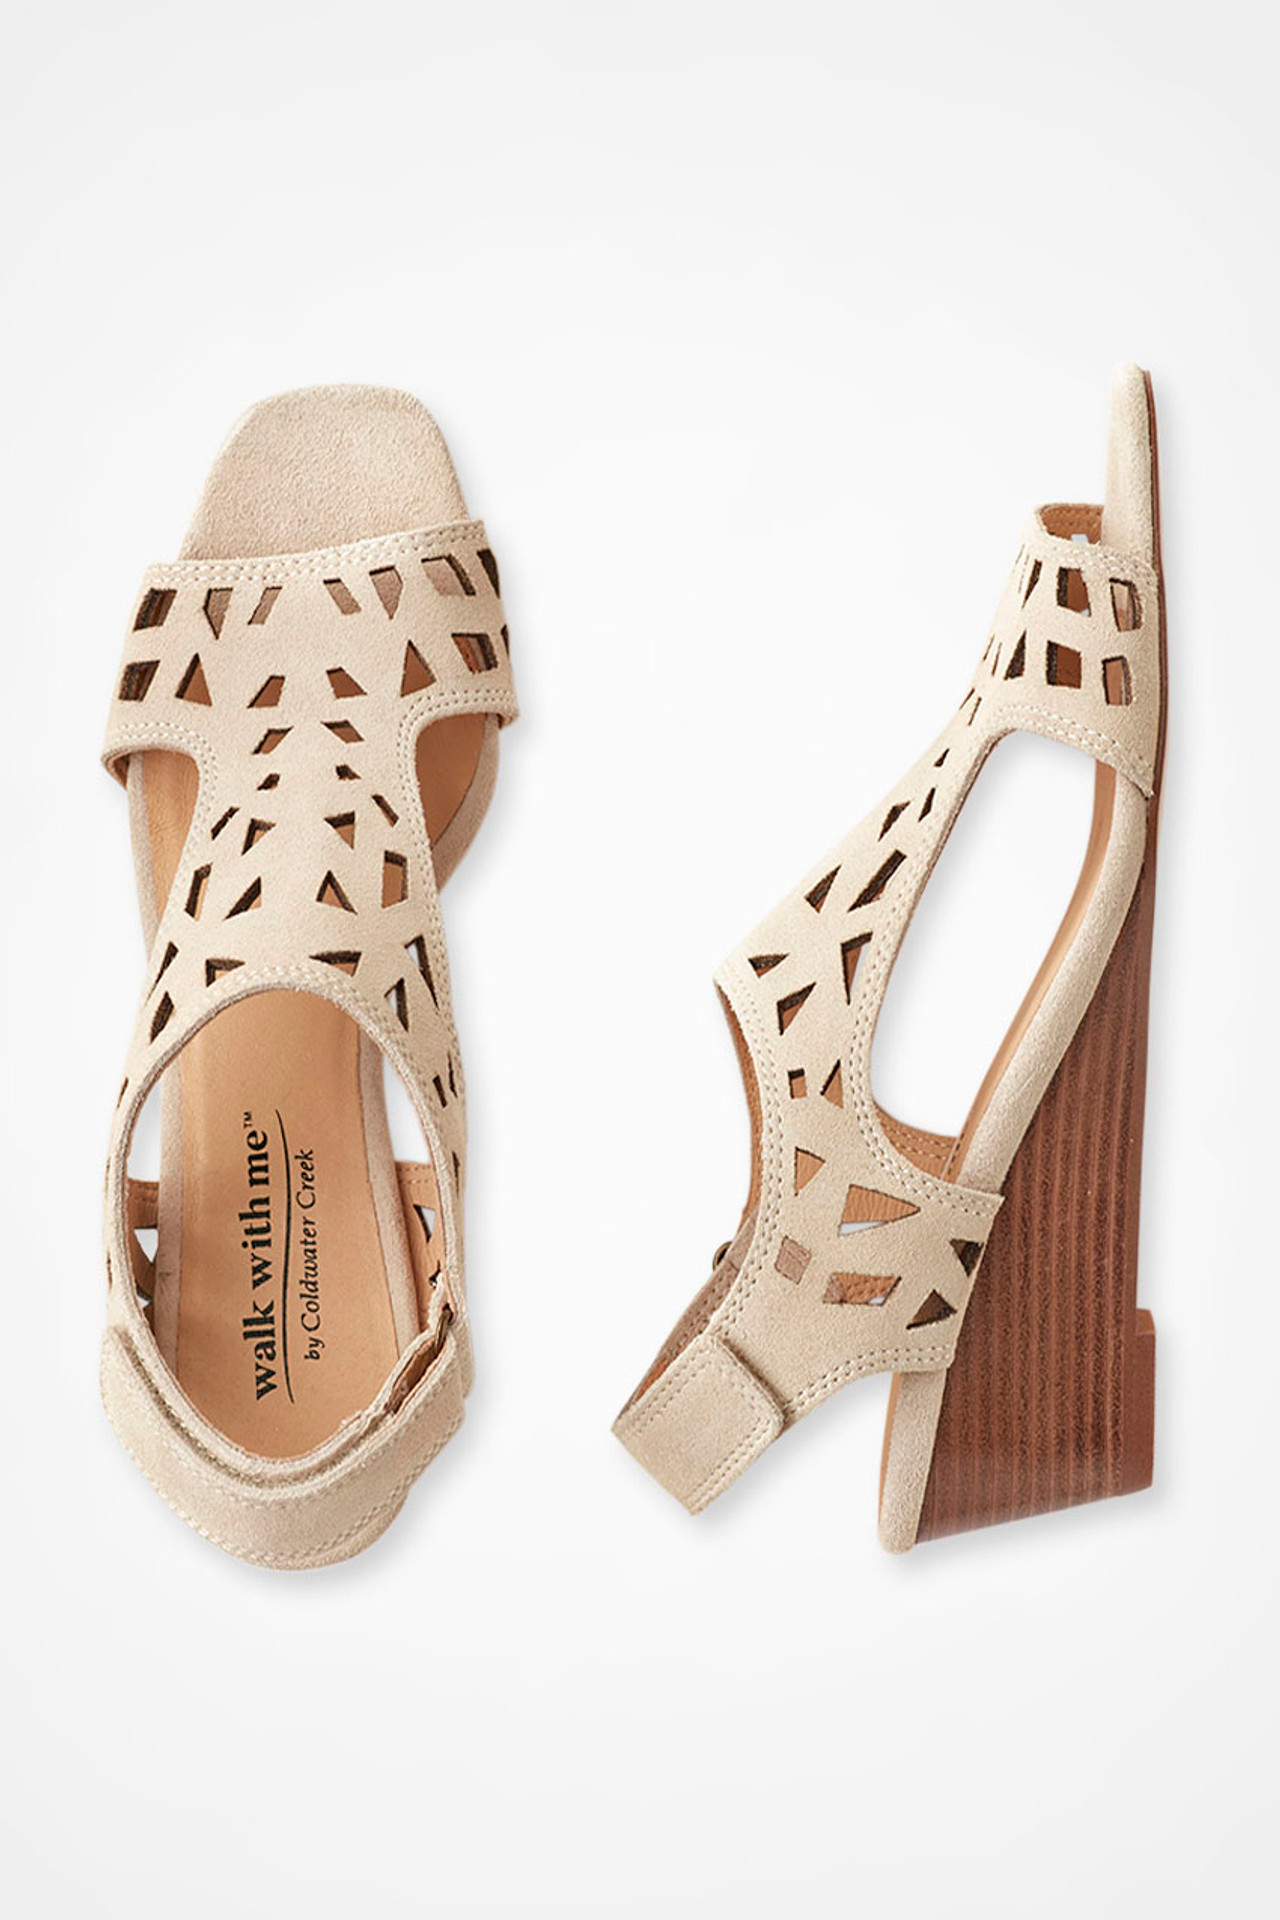 "Gayle" Suede Wedges by Walk With Me™